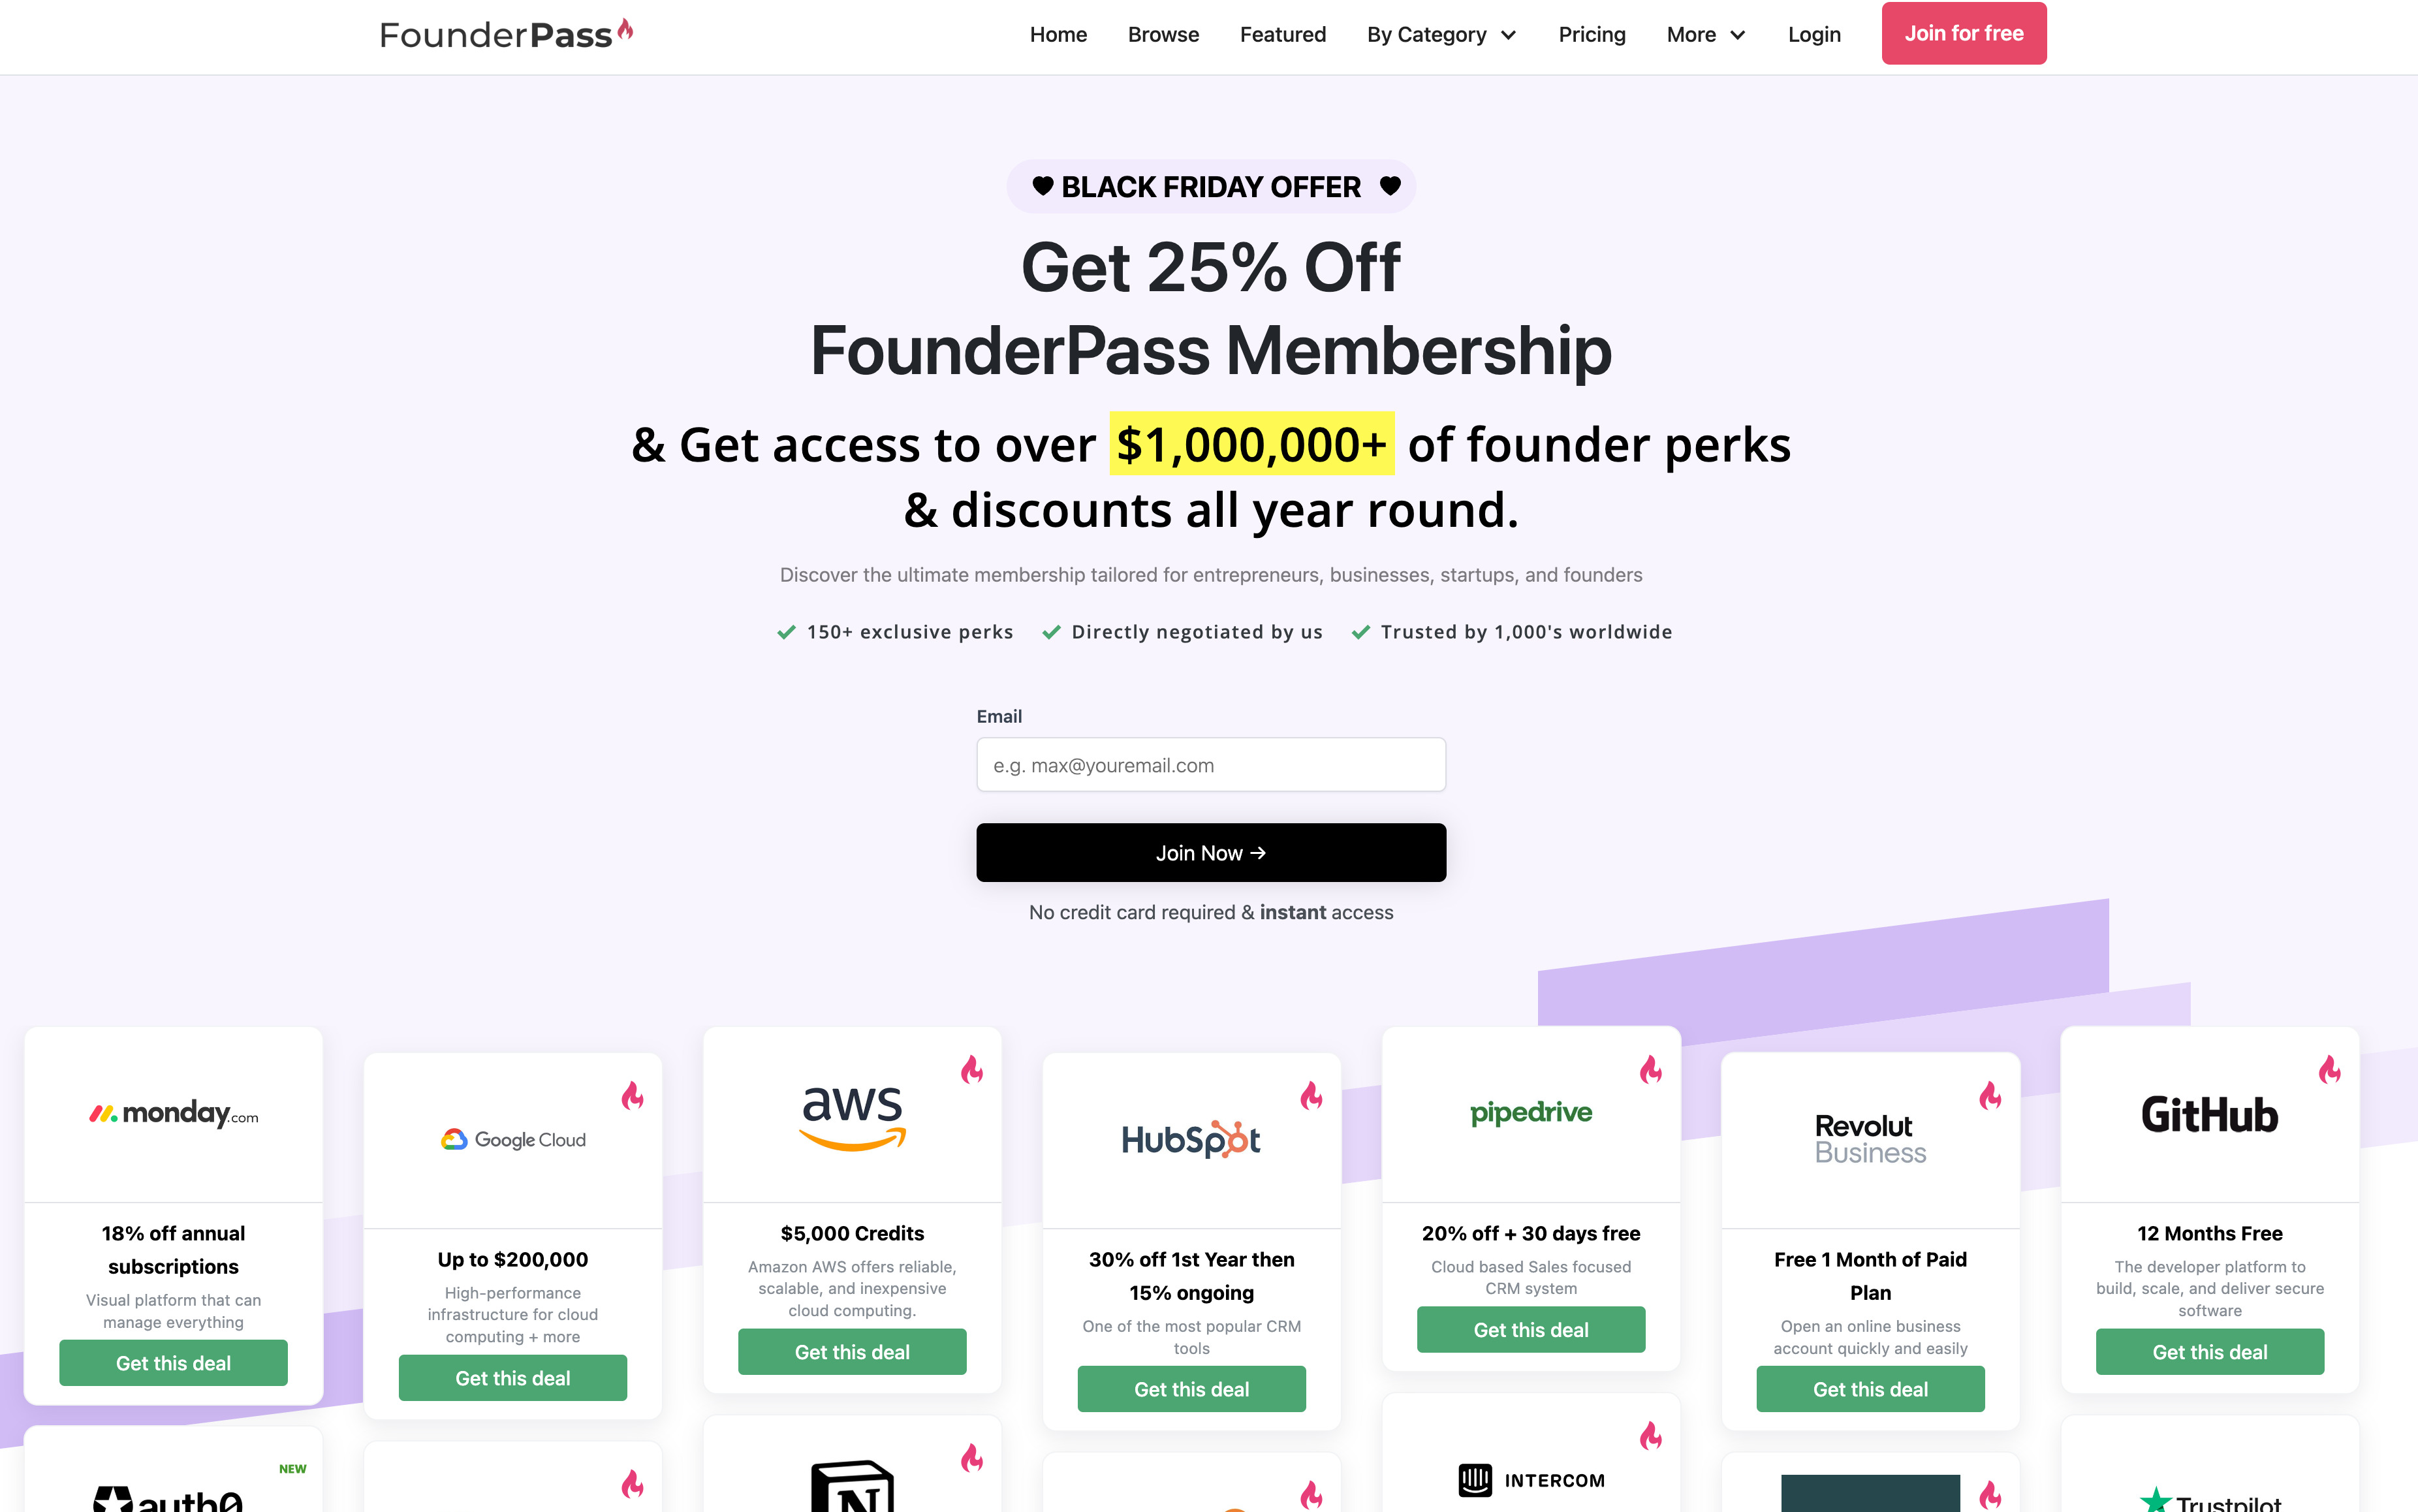 FounderPass Black Friday offer